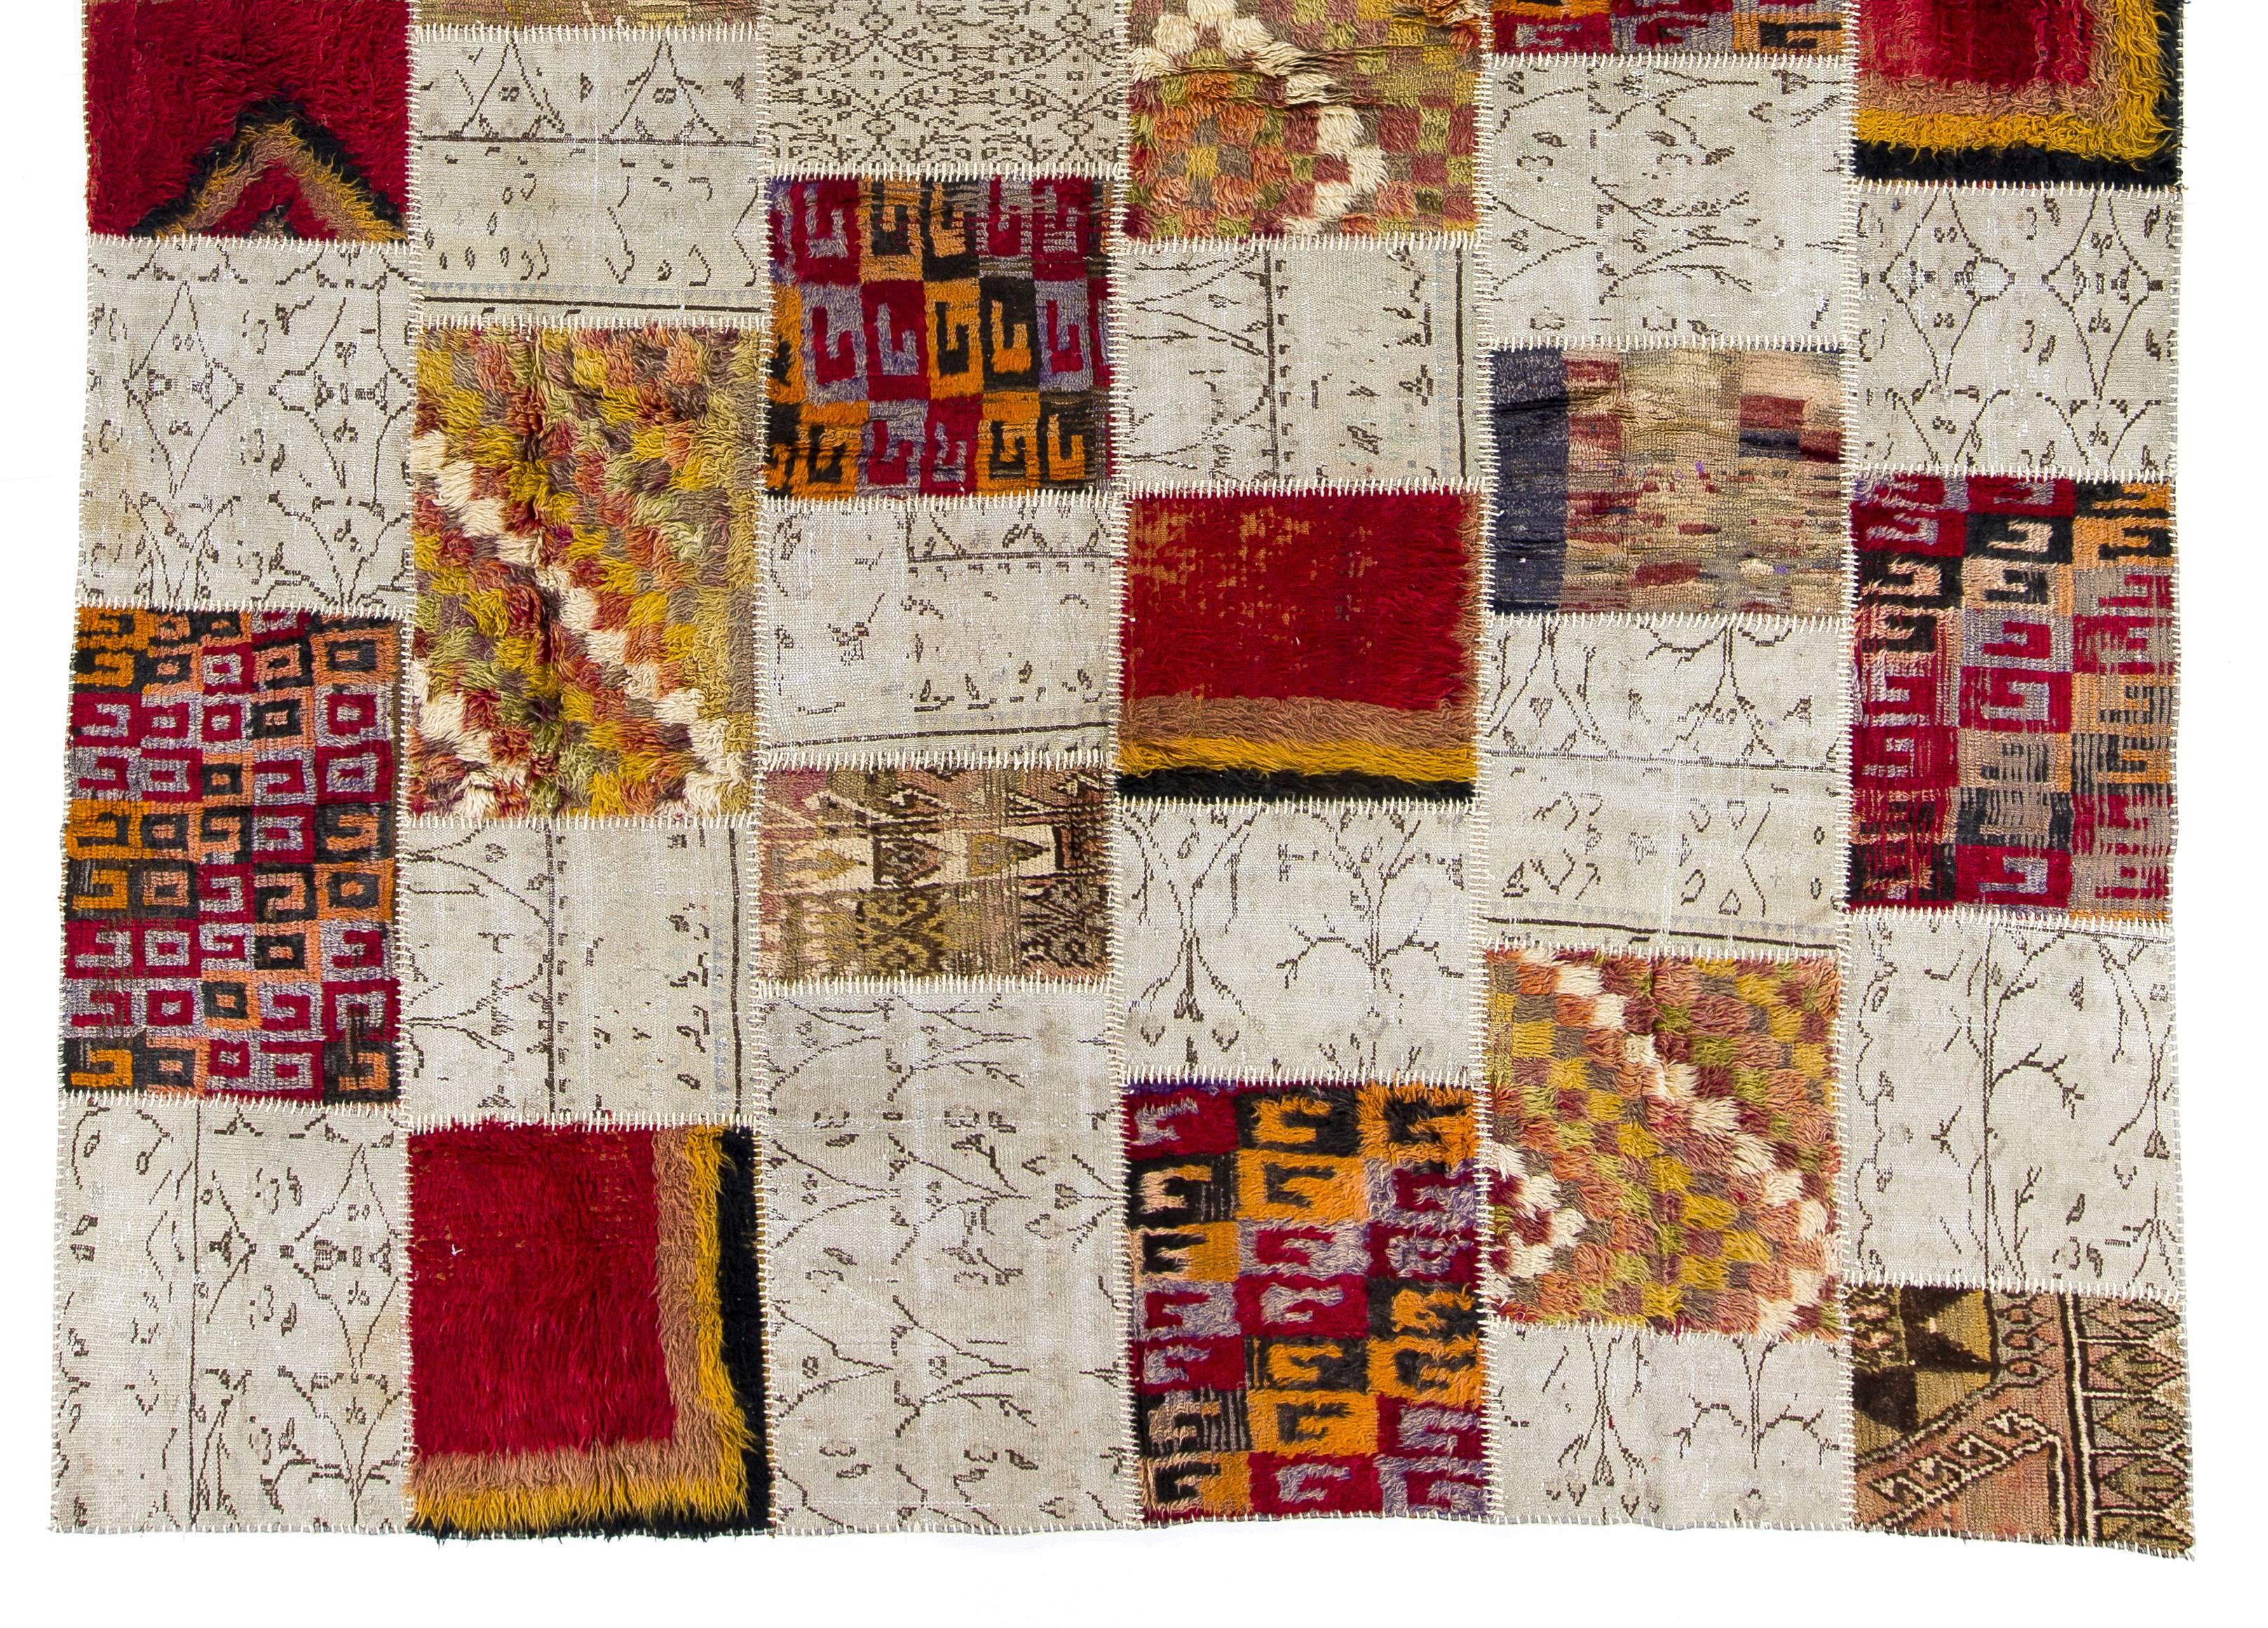 Hand-Woven One of a Kind Patchwork Rug made of Vintage Tulu and Oushak carpets